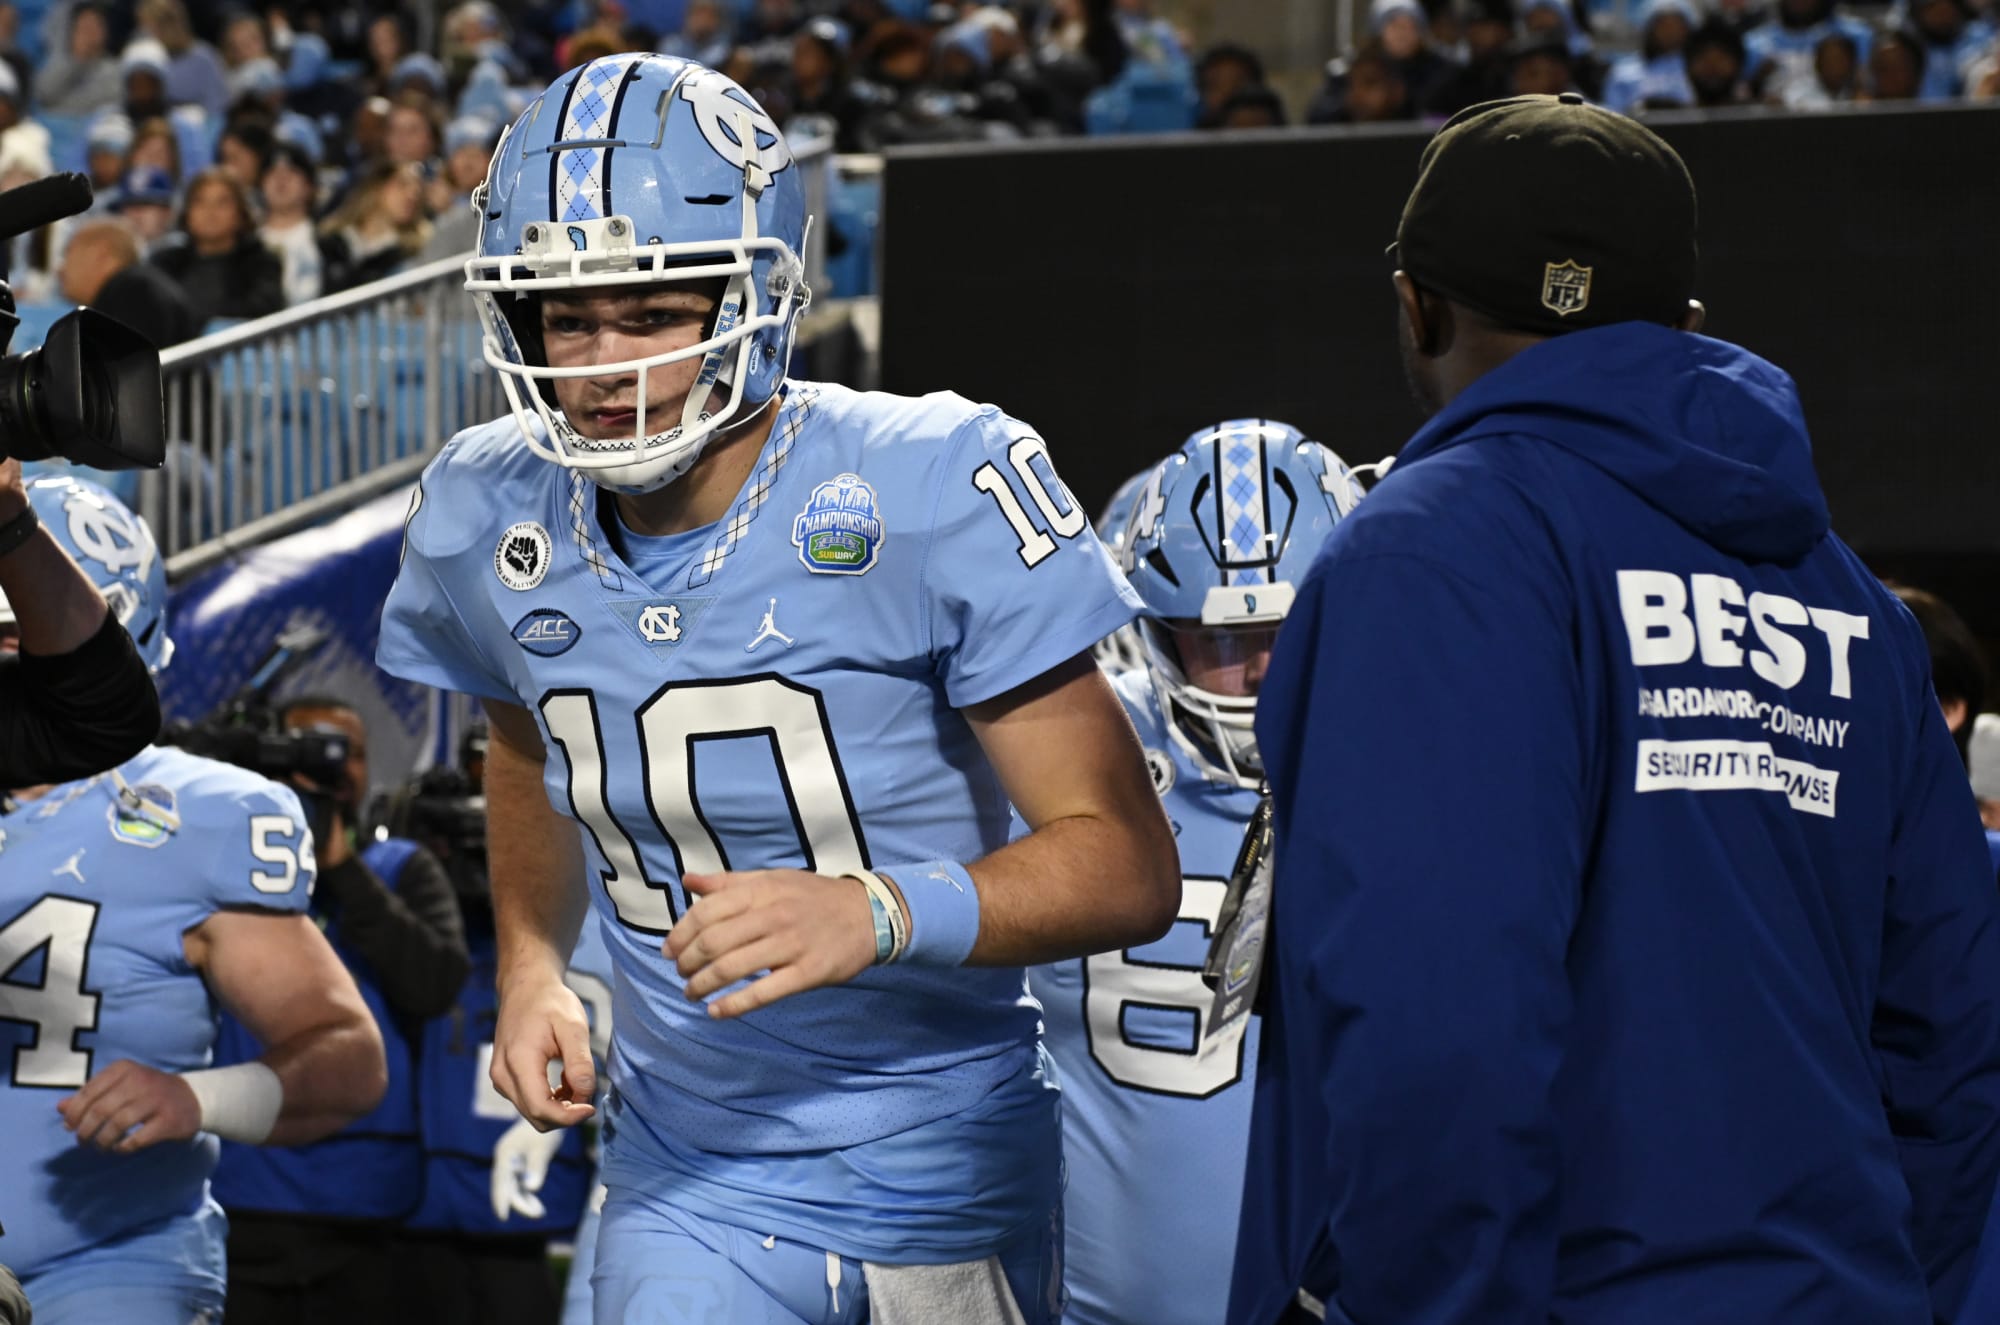 UNC quarterback Drake Maye ranked as one of the top 12 most valuable